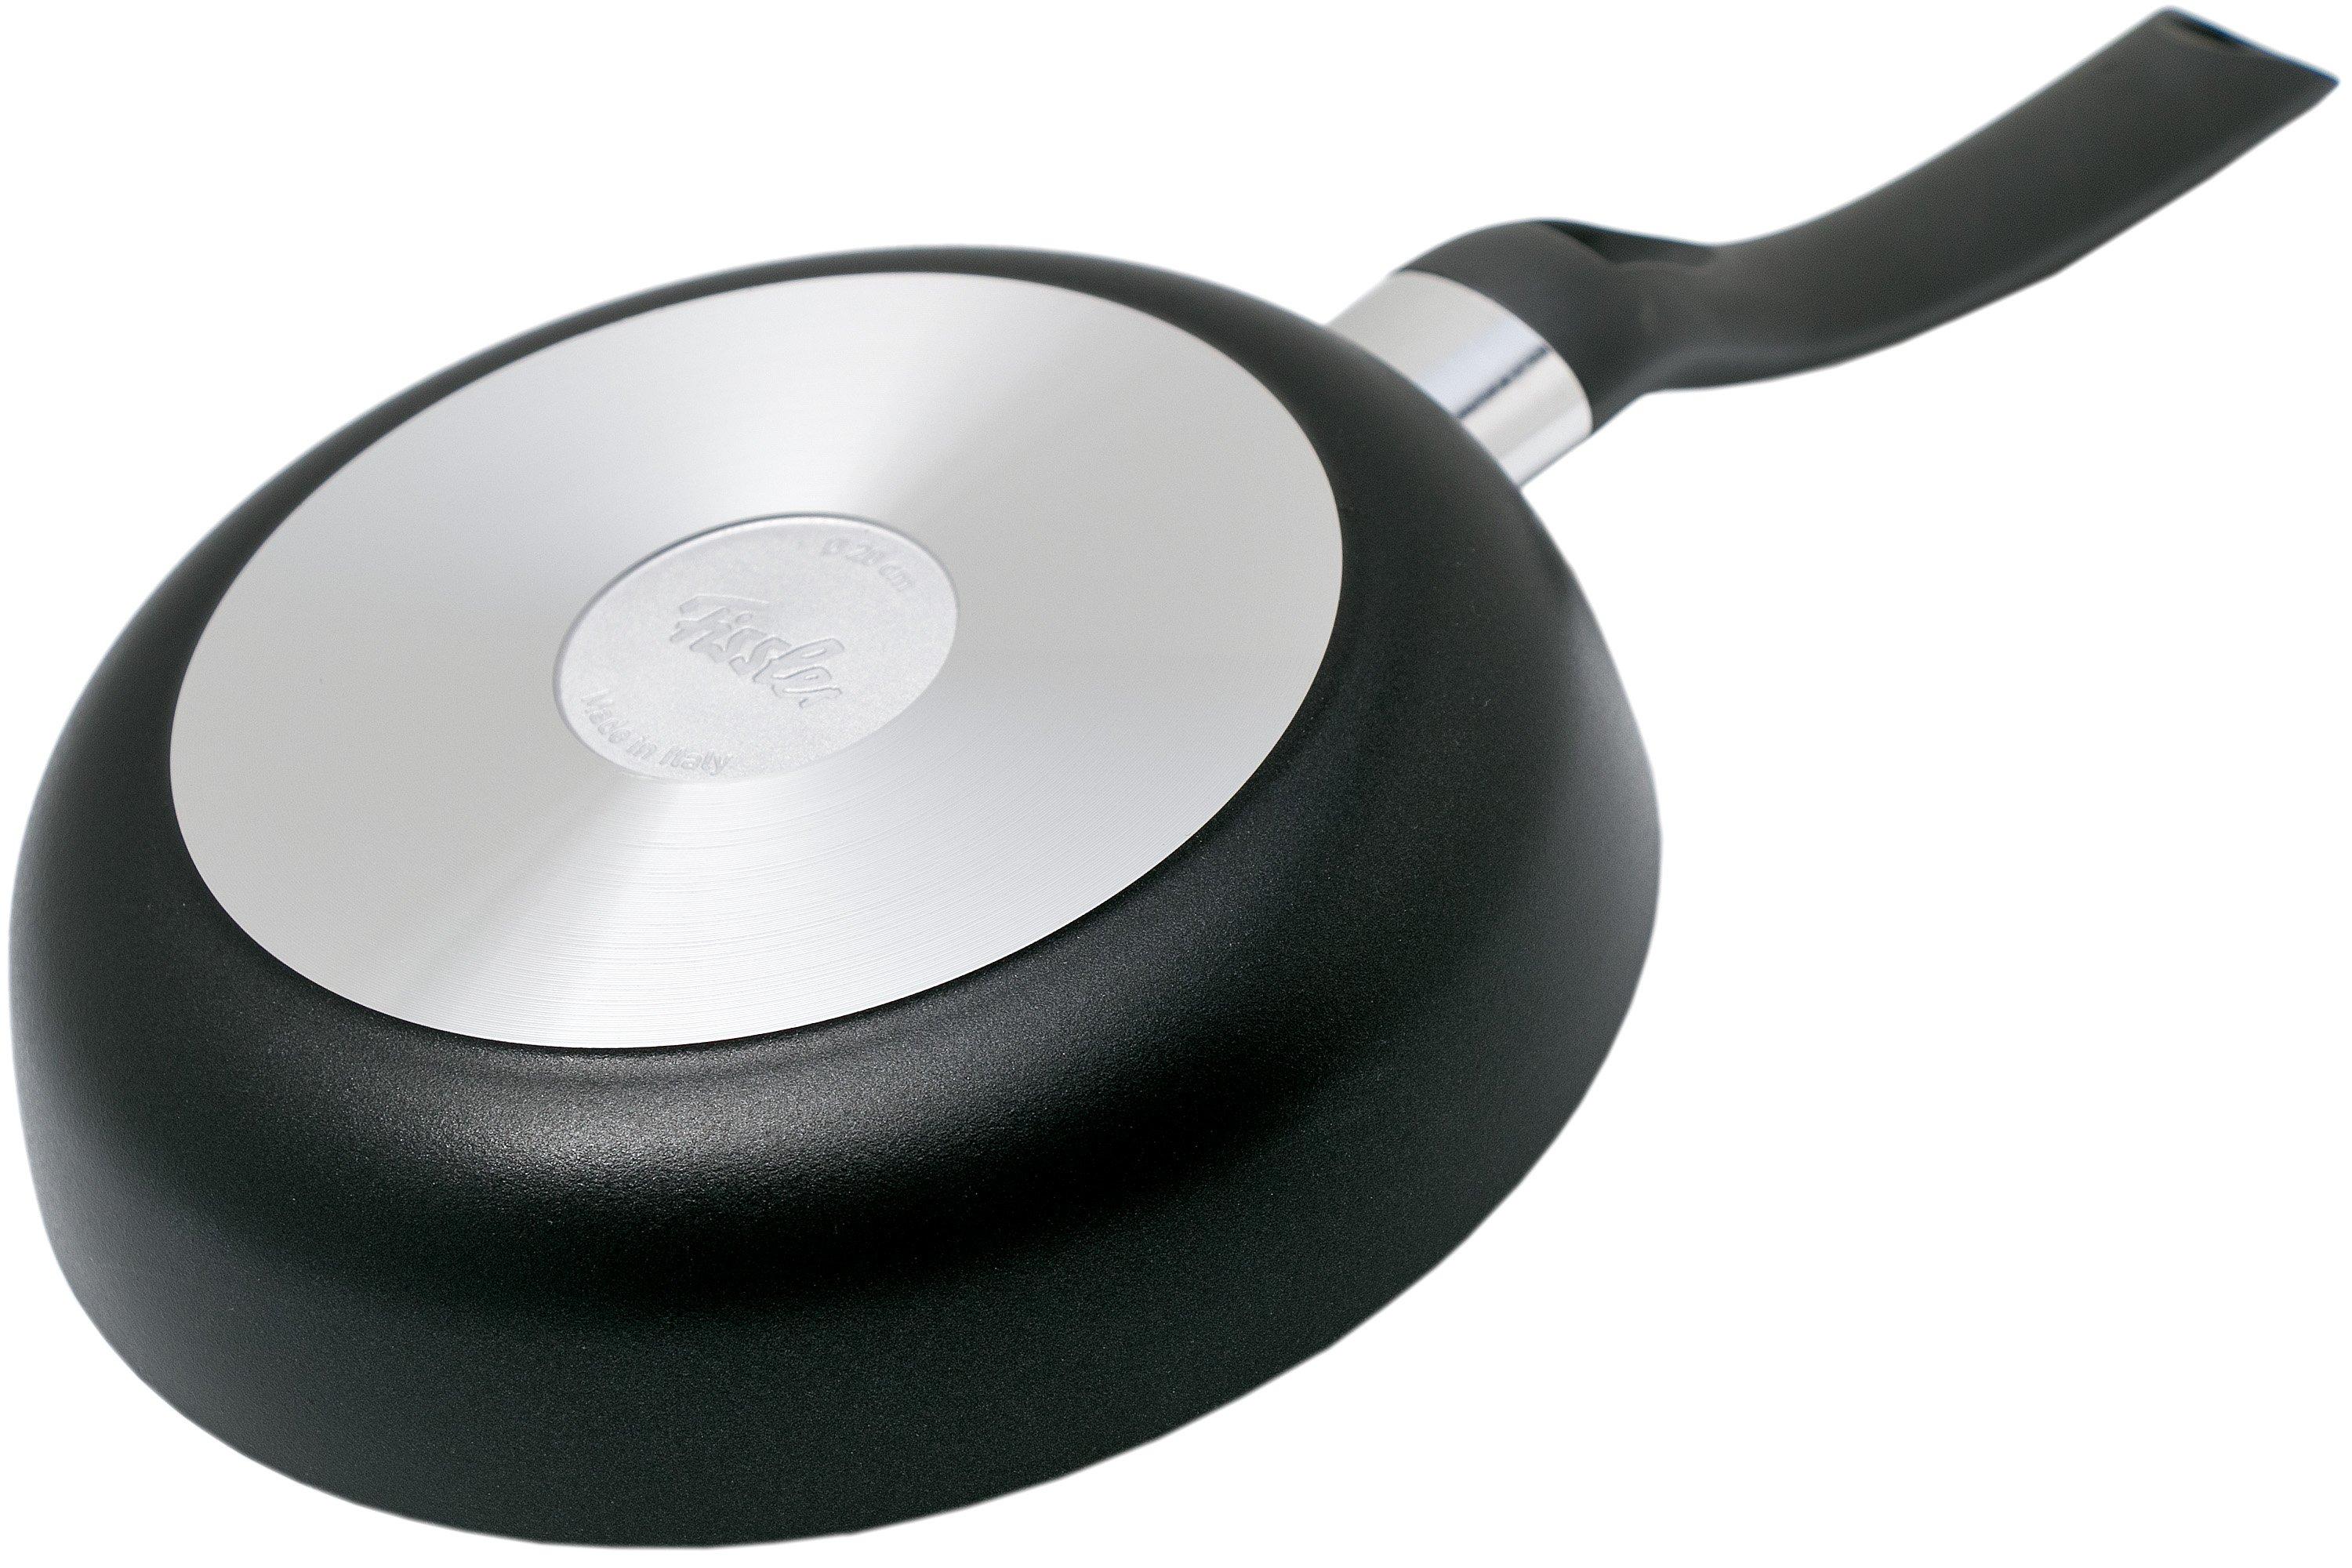 Fissler Cenit 045-300-20-100, 20 cm frying pan | Advantageously shopping at